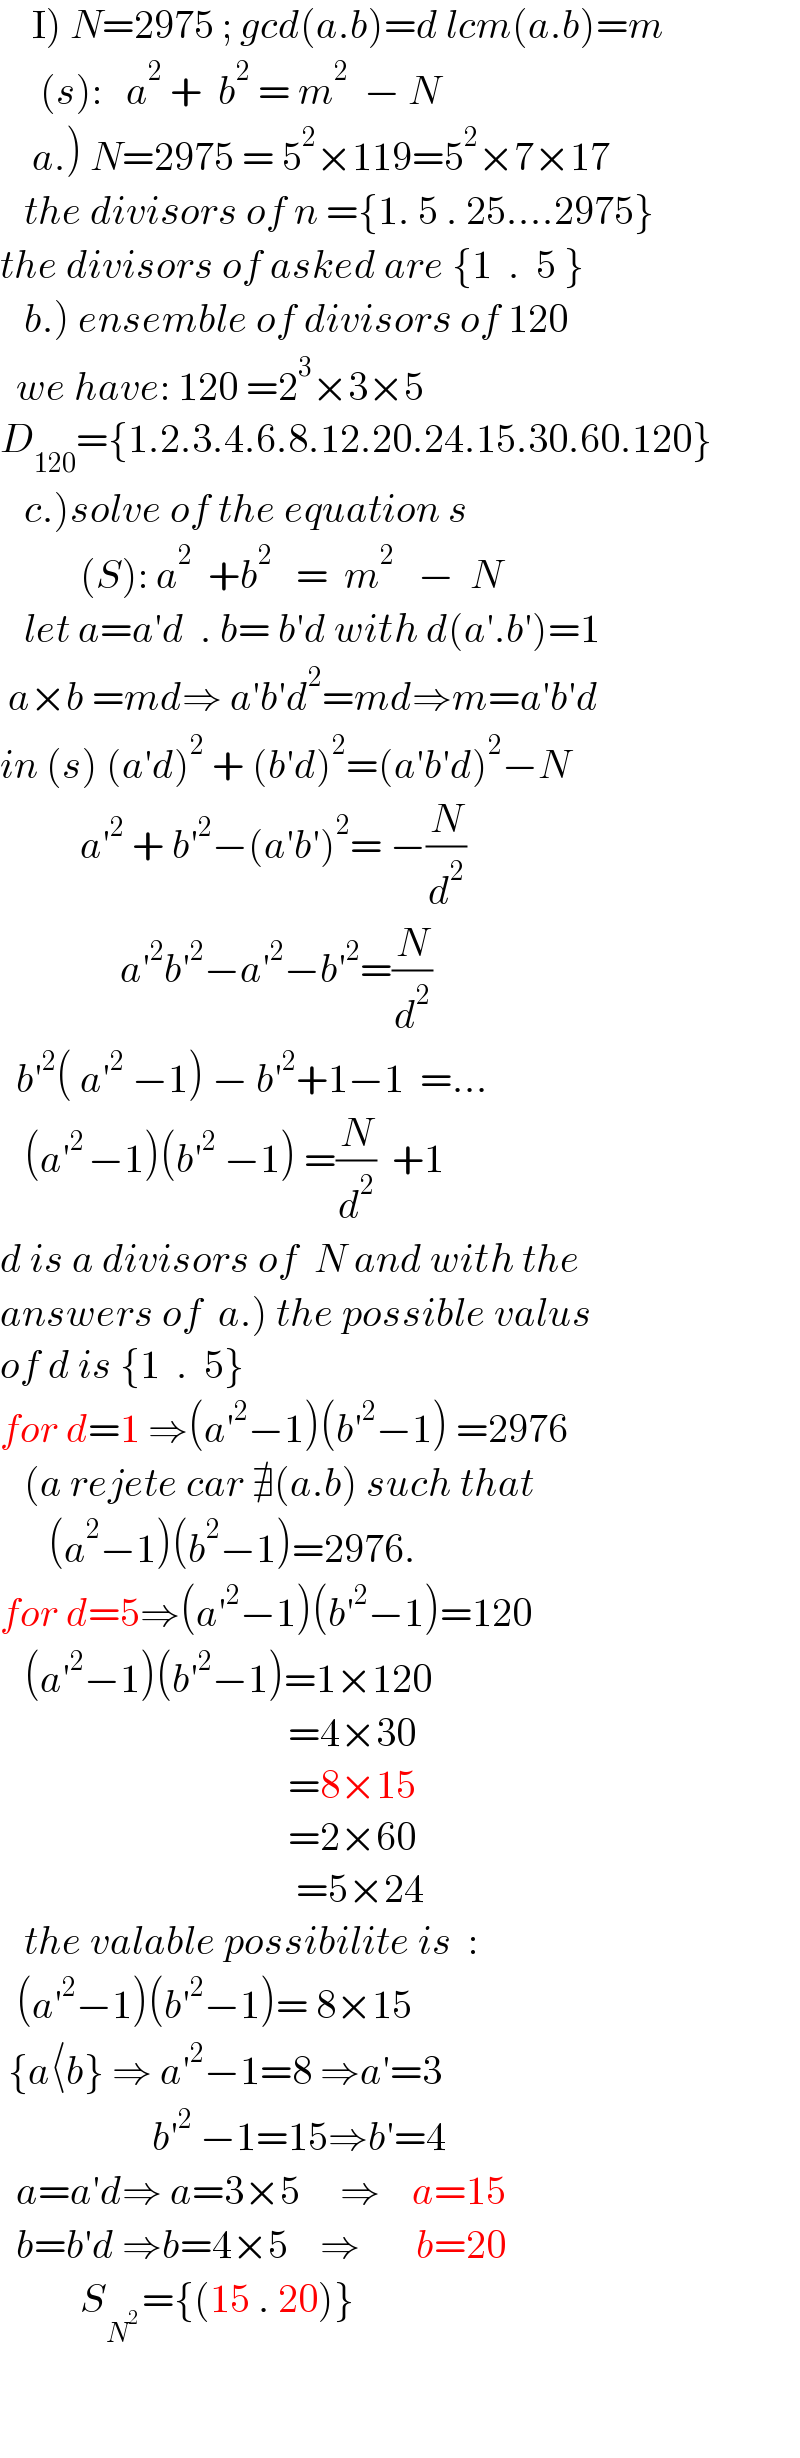     I) N=2975 ; gcd(a.b)=d lcm(a.b)=m       (s):   a^2  +  b^2  = m^2   − N      a.) N=2975 = 5^2 ×119=5^2 ×7×17     the divisors of n ={1. 5 . 25....2975}  the divisors of asked are {1  .  5 }     b.) ensemble of divisors of 120    we have: 120 =2^3 ×3×5  D_(120) ={1.2.3.4.6.8.12.20.24.15.30.60.120}     c.)solve of the equation s            (S): a^2   +b^2    =  m^2    −  N     let a=a′d  . b= b′d with d(a′.b′)=1   a×b =md⇒ a′b′d^2 =md⇒m=a′b′d  in (s) (a′d)^2  + (b′d)^2 =(a′b′d)^2 −N            a′^2  + b′^2 −(a′b′)^2 = −(N/d^2 )                 a′^2 b′^2 −a′^2 −b′^2 =(N/d^2 )    b′^2 ( a′^2  −1) − b′^2 +1−1  =...     (a′^(2 ) −1)(b′^2  −1) =(N/d^2 )  +1  d is a divisors of  N and with the   answers of  a.) the possible valus   of d is {1  .  5}  for d=1 ⇒(a′^2 −1)(b′^2 −1) =2976     (a rejete car ∄(a.b) such that         (a^2 −1)(b^2 −1)=2976.  for d=5⇒(a′^2 −1)(b′^2 −1)=120     (a′^2 −1)(b′^2 −1)=1×120                                      =4×30                                      =8×15                                      =2×60                                       =5×24     the valable possibilite is  :    (a′^2 −1)(b′^2 −1)= 8×15     {a⟨b} ⇒ a′^2 −1=8 ⇒a′=3                     b′^2  −1=15⇒b′=4    a=a′d⇒ a=3×5     ⇒    a=15    b=b′d ⇒b=4×5    ⇒       b=20            S_N^(2 )  ={(15 . 20)}                                            